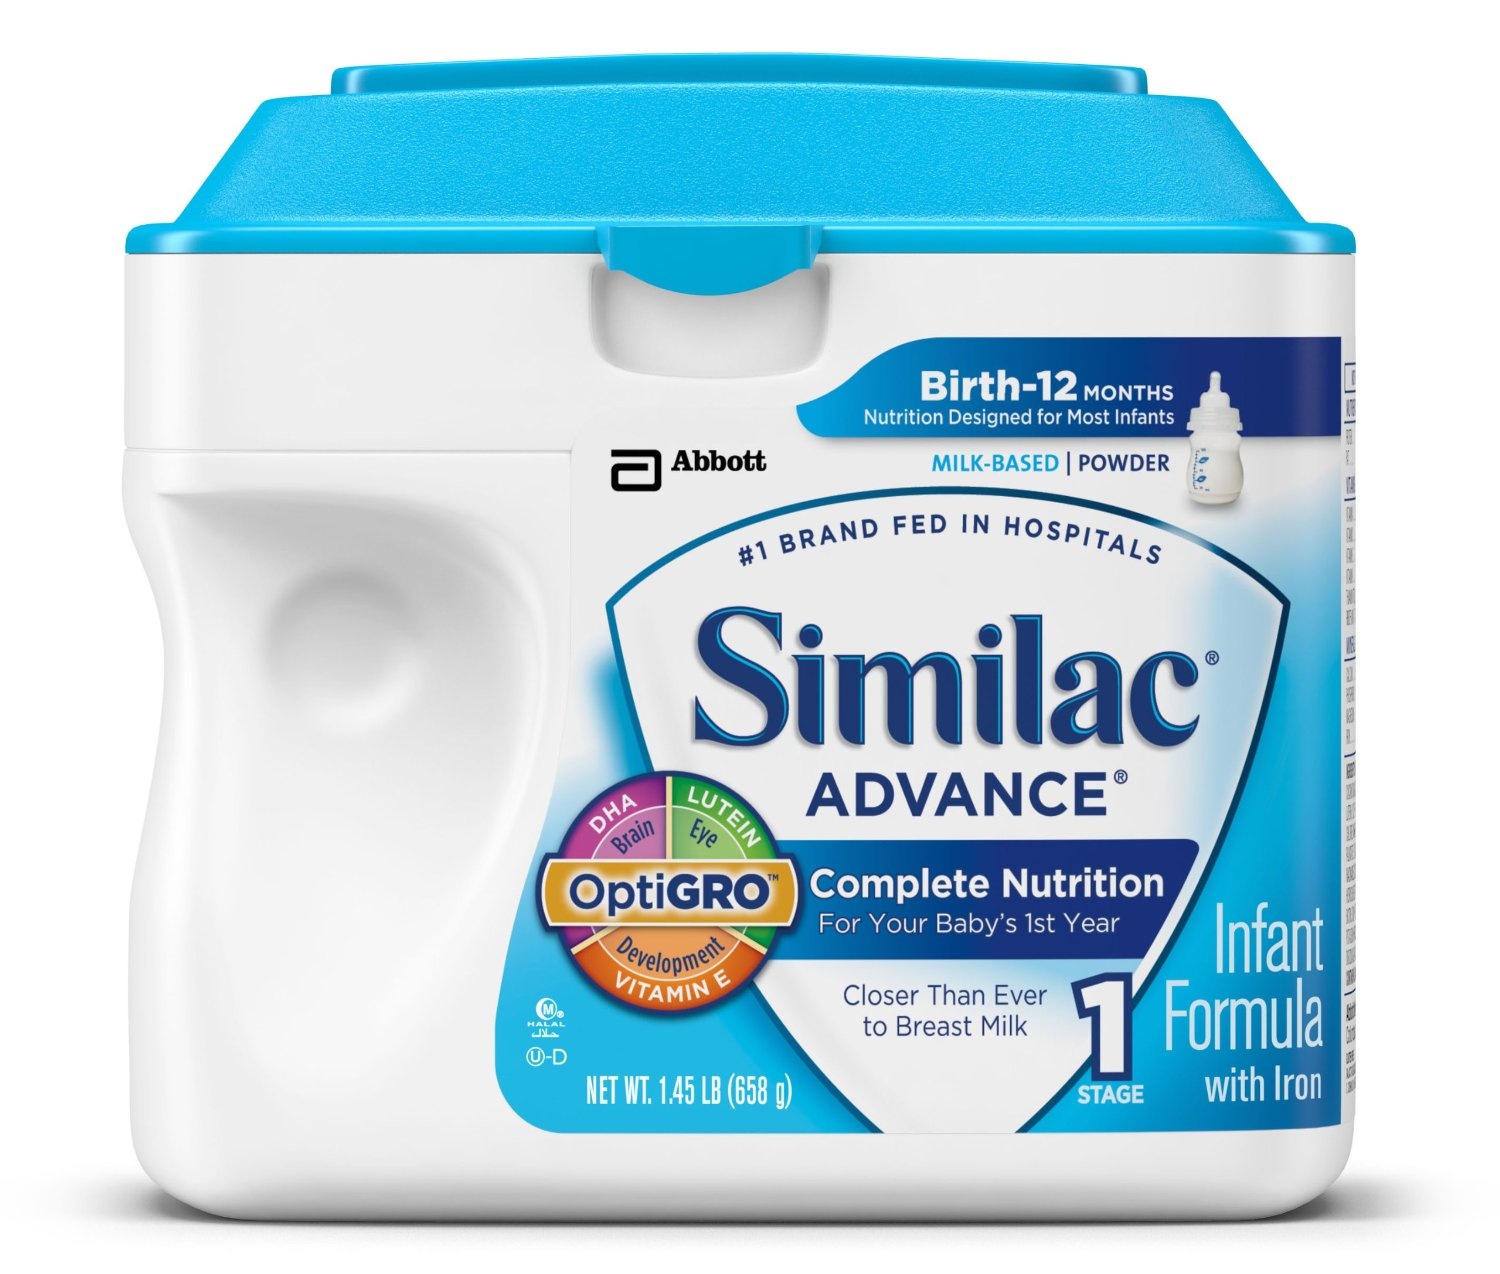 How To Get Coupons For Similac Baby Formula / Wcco Dining Out Deals - Free Baby Formula Coupons Printable